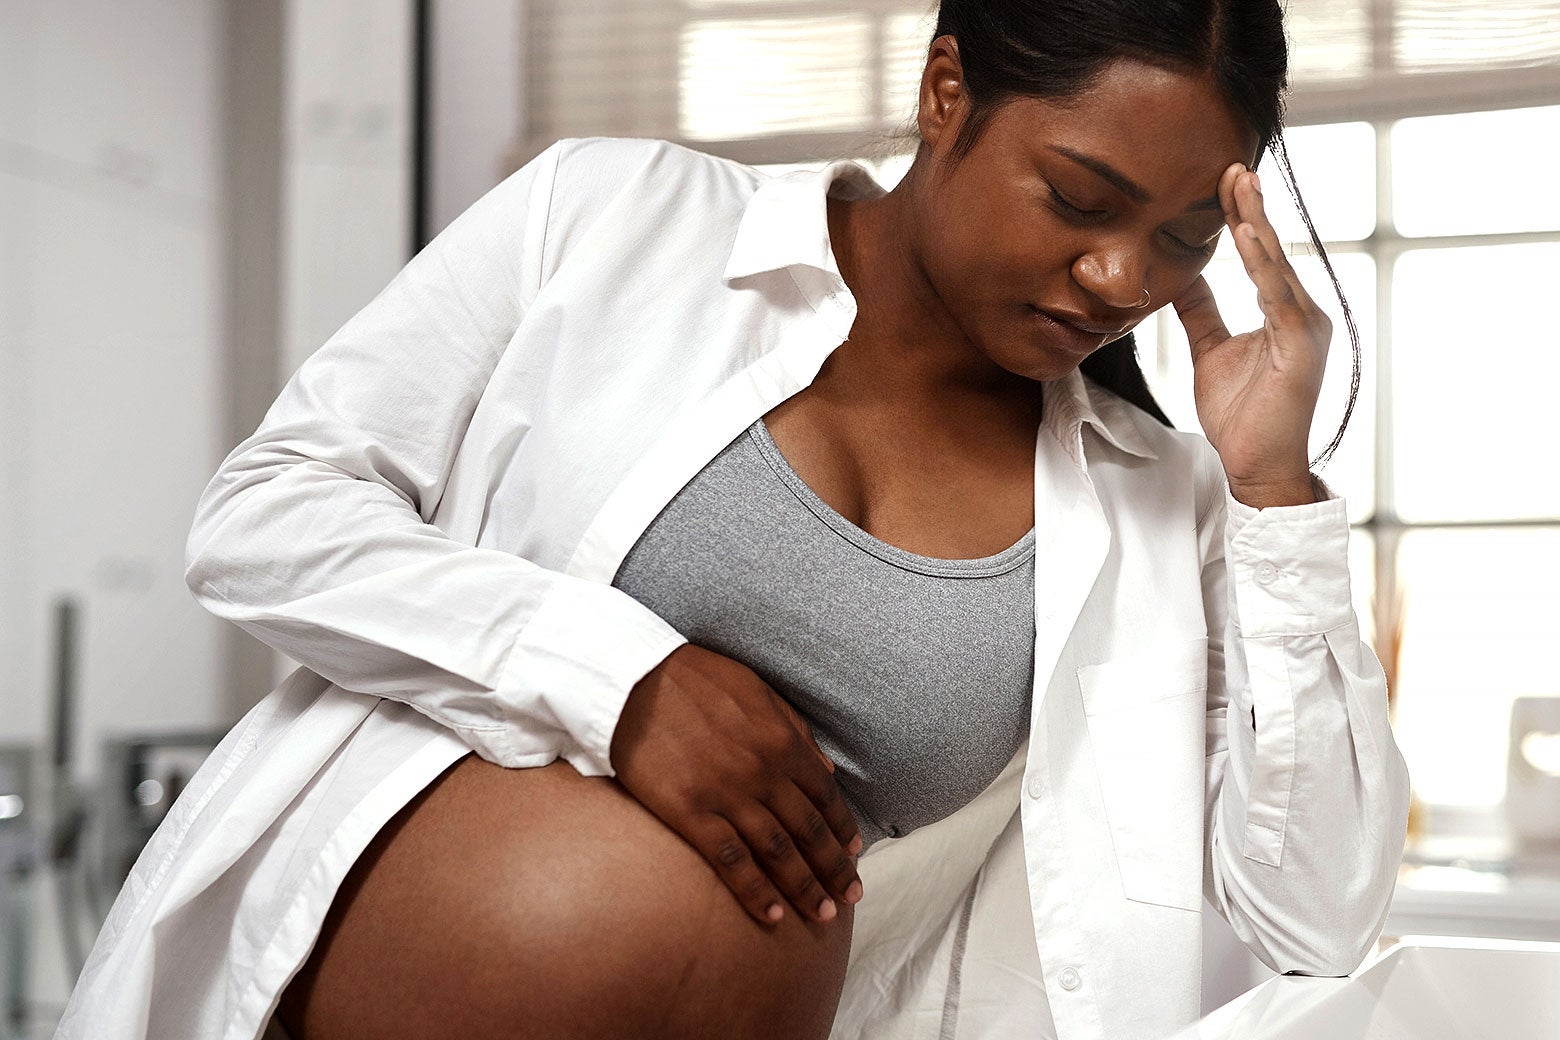 A pregnant woman holding her midsection in distress.